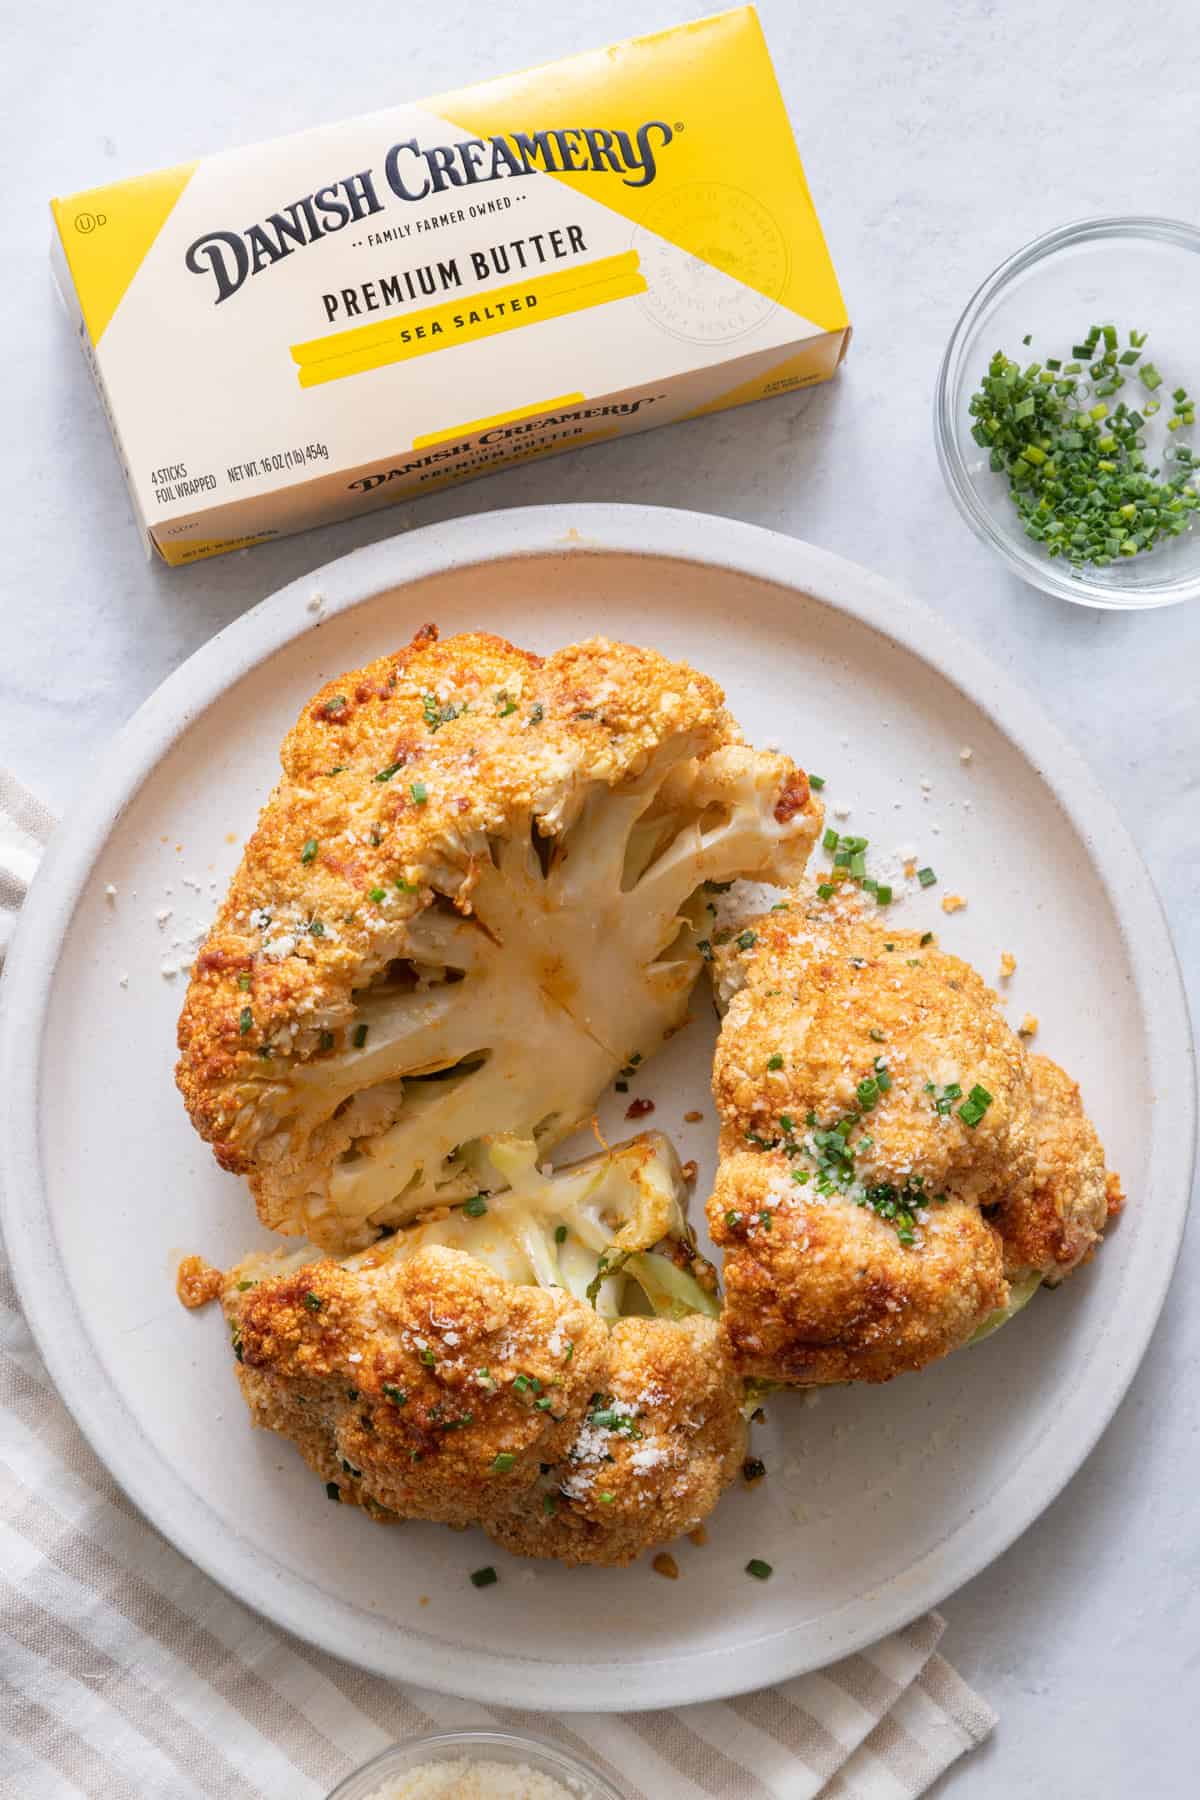 Large white serving dish with cauliflower that has been roasted with a seasoned blend of Danish Creamery butter.